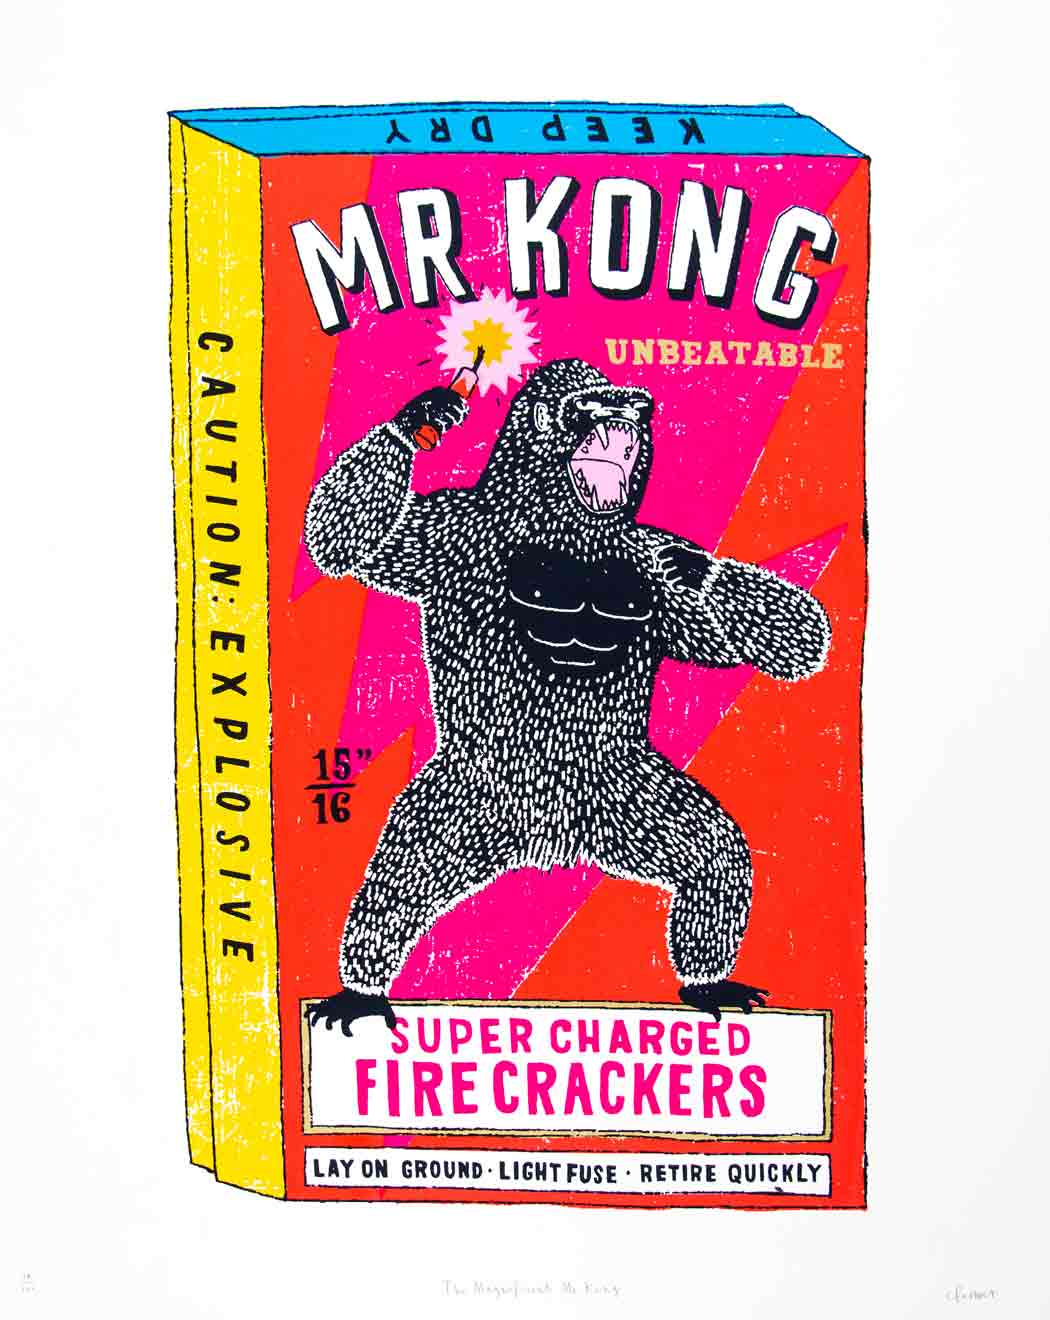 The Magnificient Mr Kong Enlarged